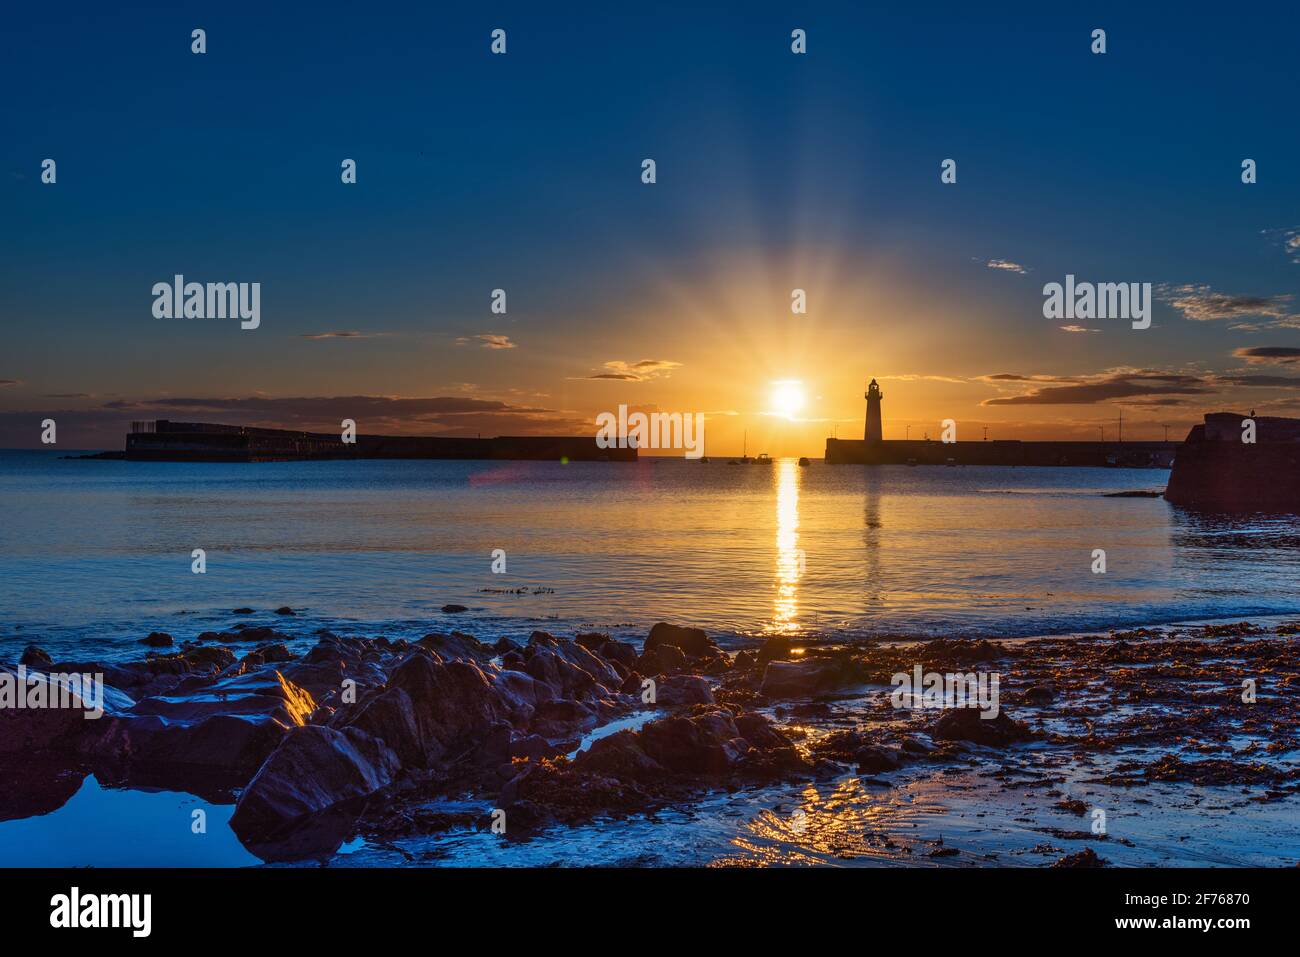 Just a few minutes after sunrise on midsummer morning at Donaghadee harbour, County Down, Northern Ireland. Stock Photo